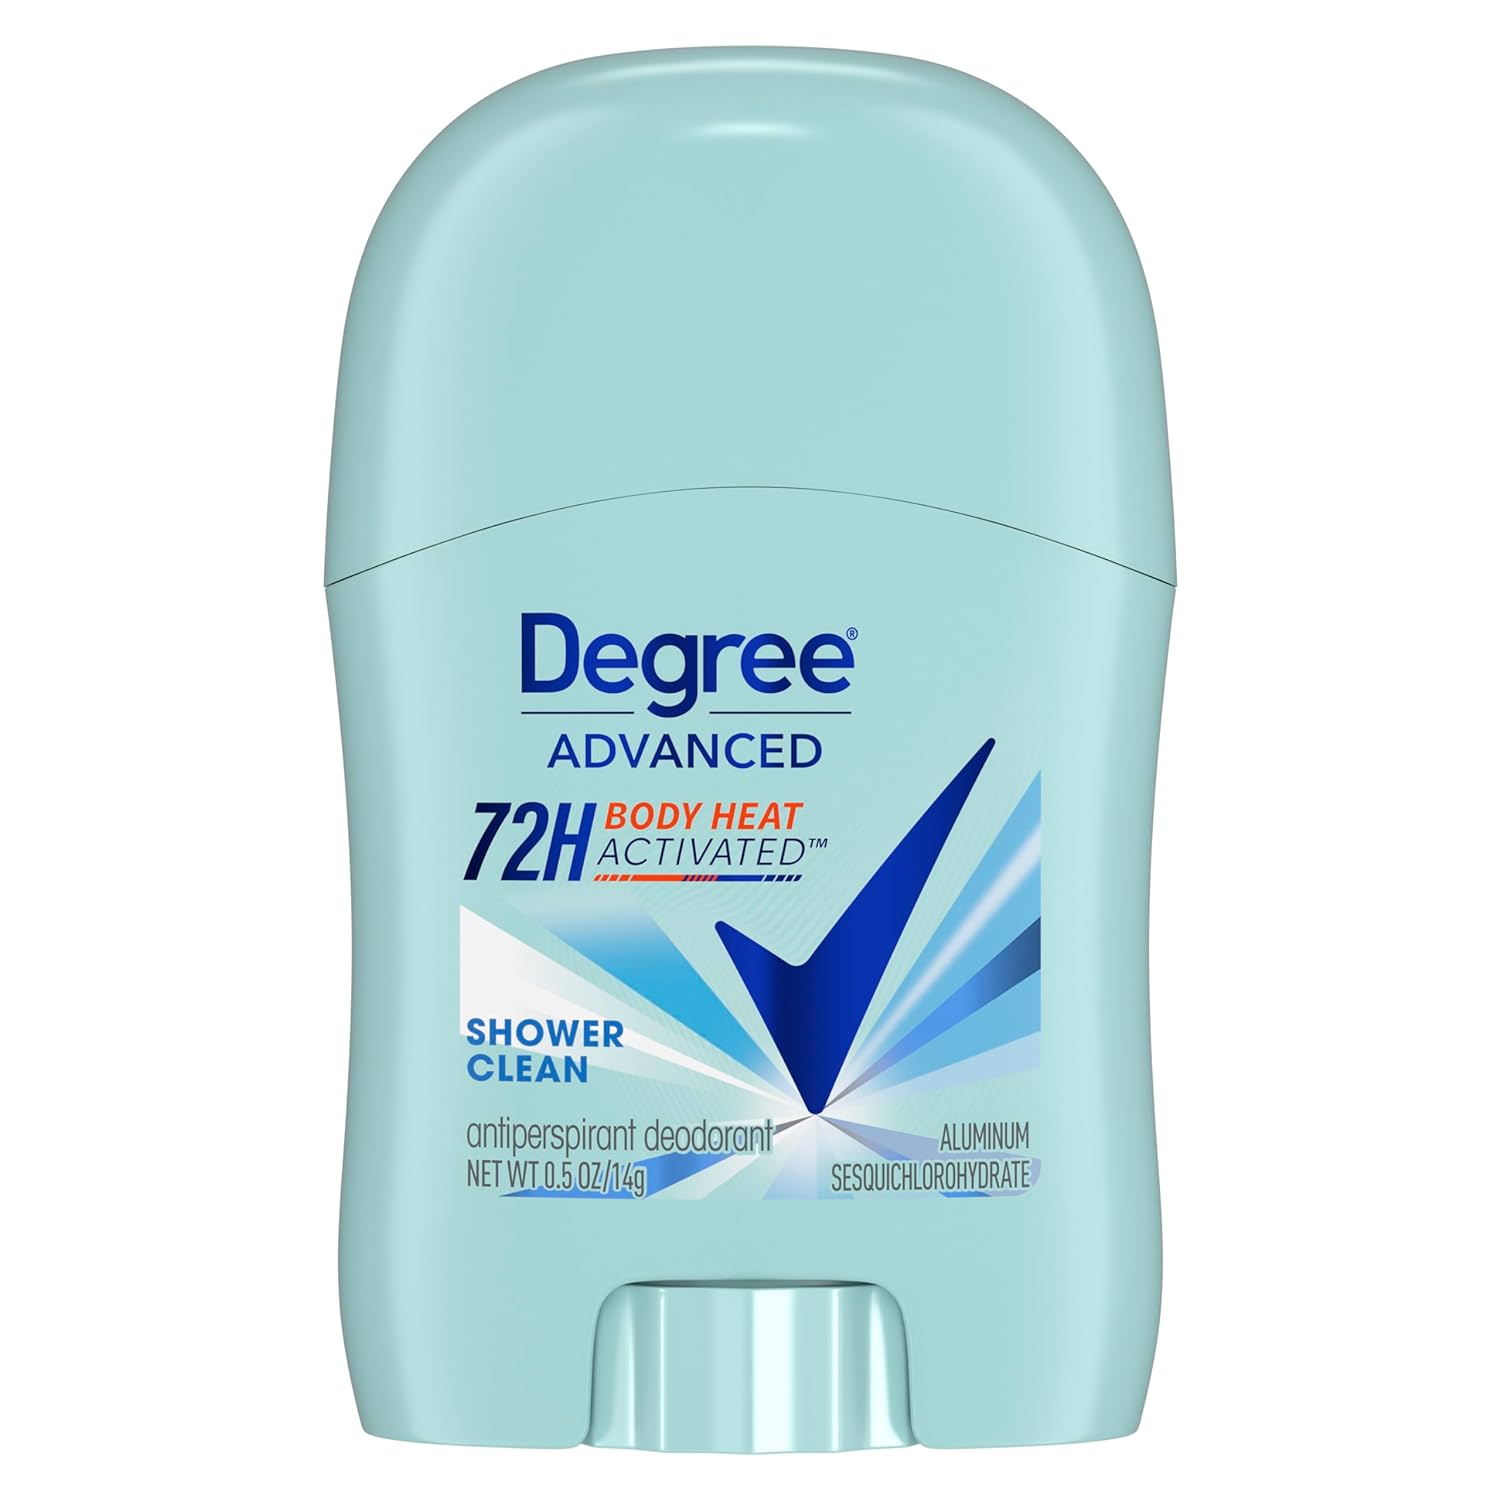 Degree Advanced Antiperspirant Deodorant Shower Clean Pack of 36 72-Hour Sweat & Odor Protection Antiperspirant for Women with MotionSense Technology 0.5 oz